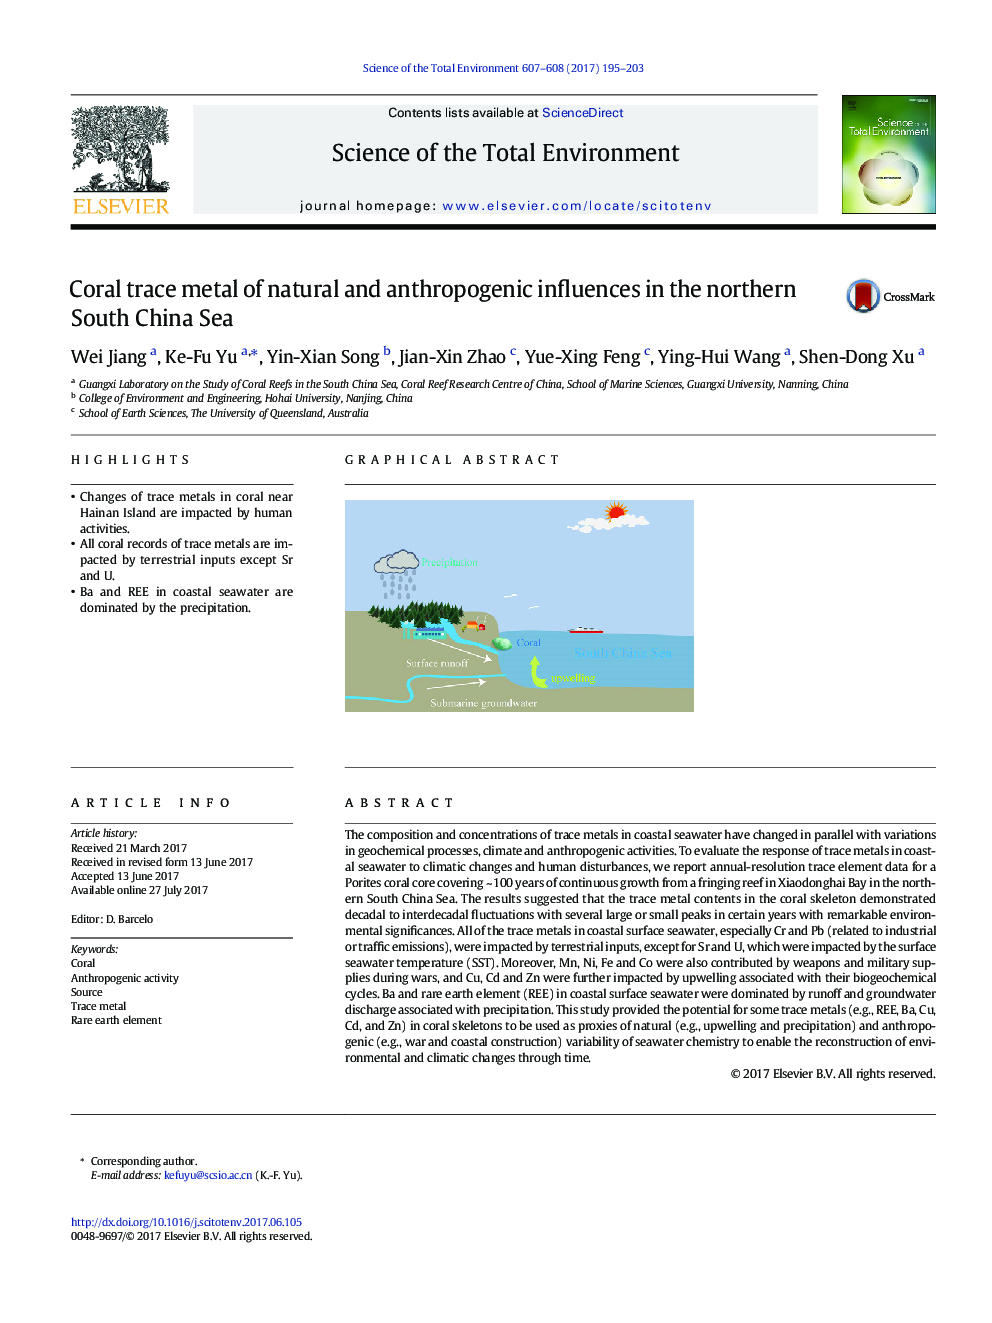 Coral trace metal of natural and anthropogenic influences in the northern South China Sea